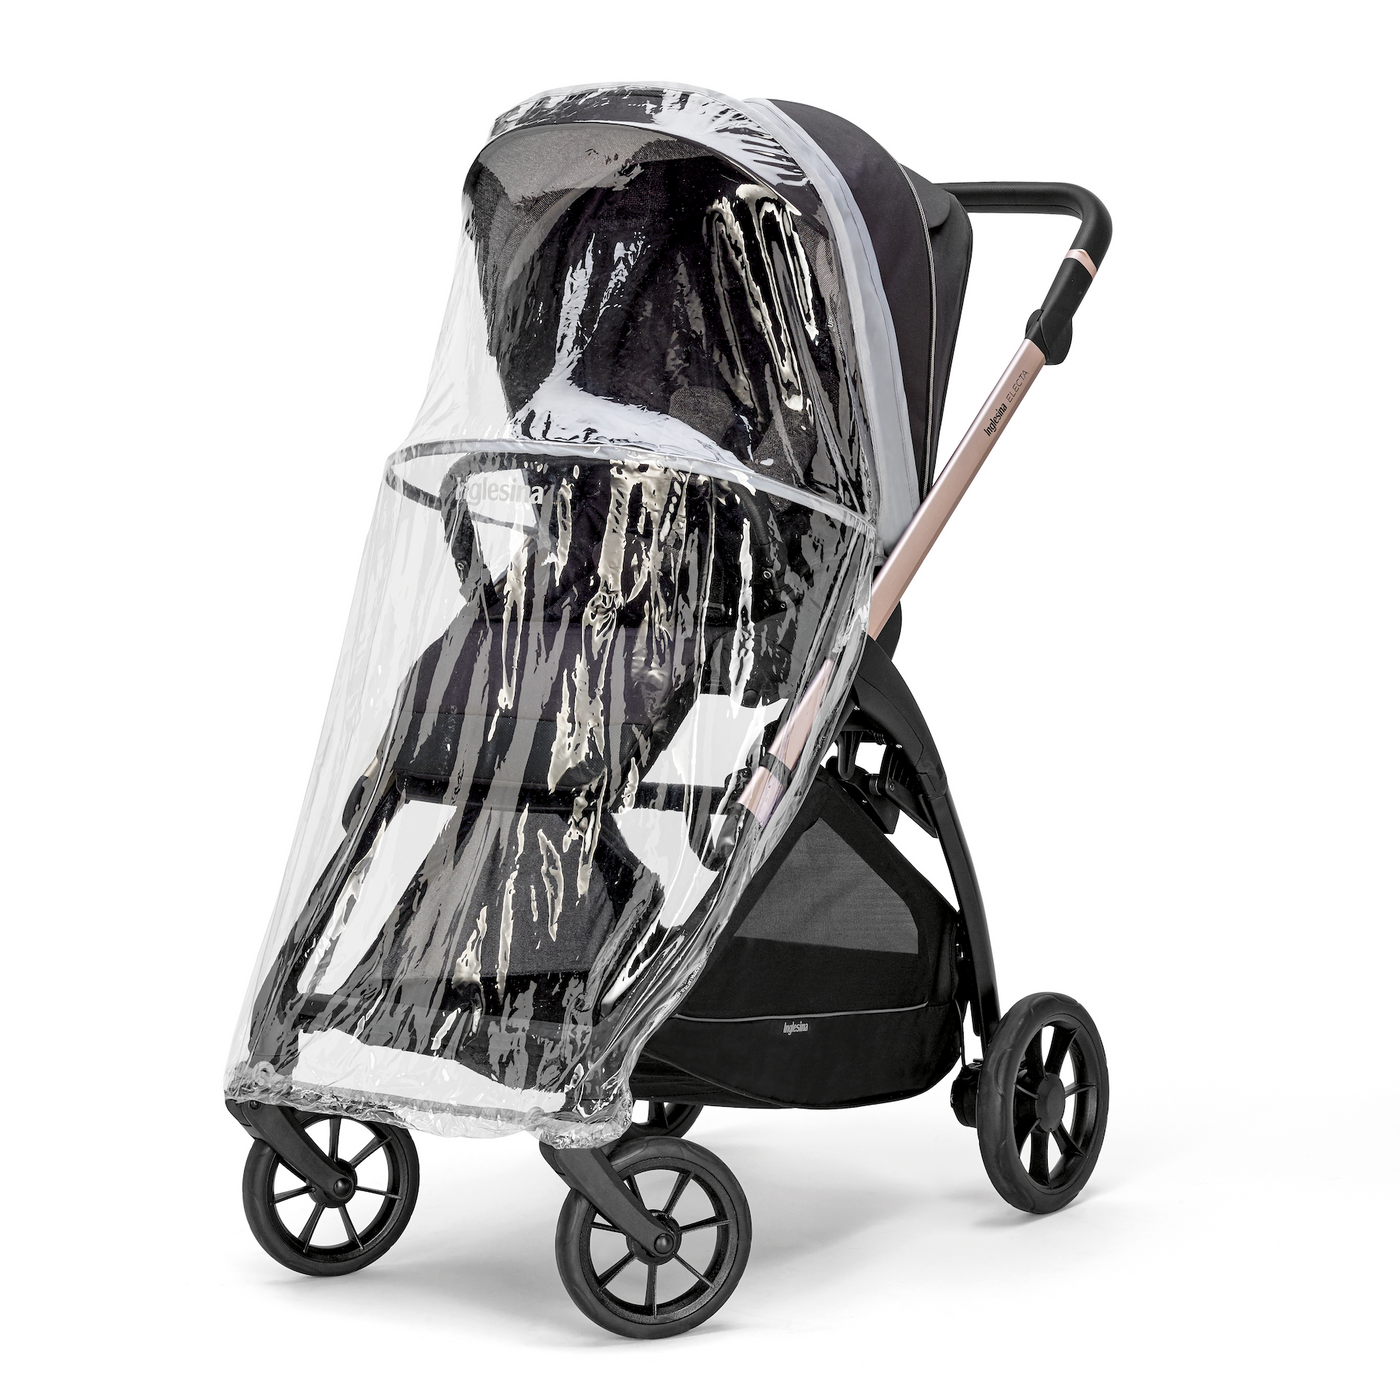 Electa stroller includes a raincover for babies and toddlers